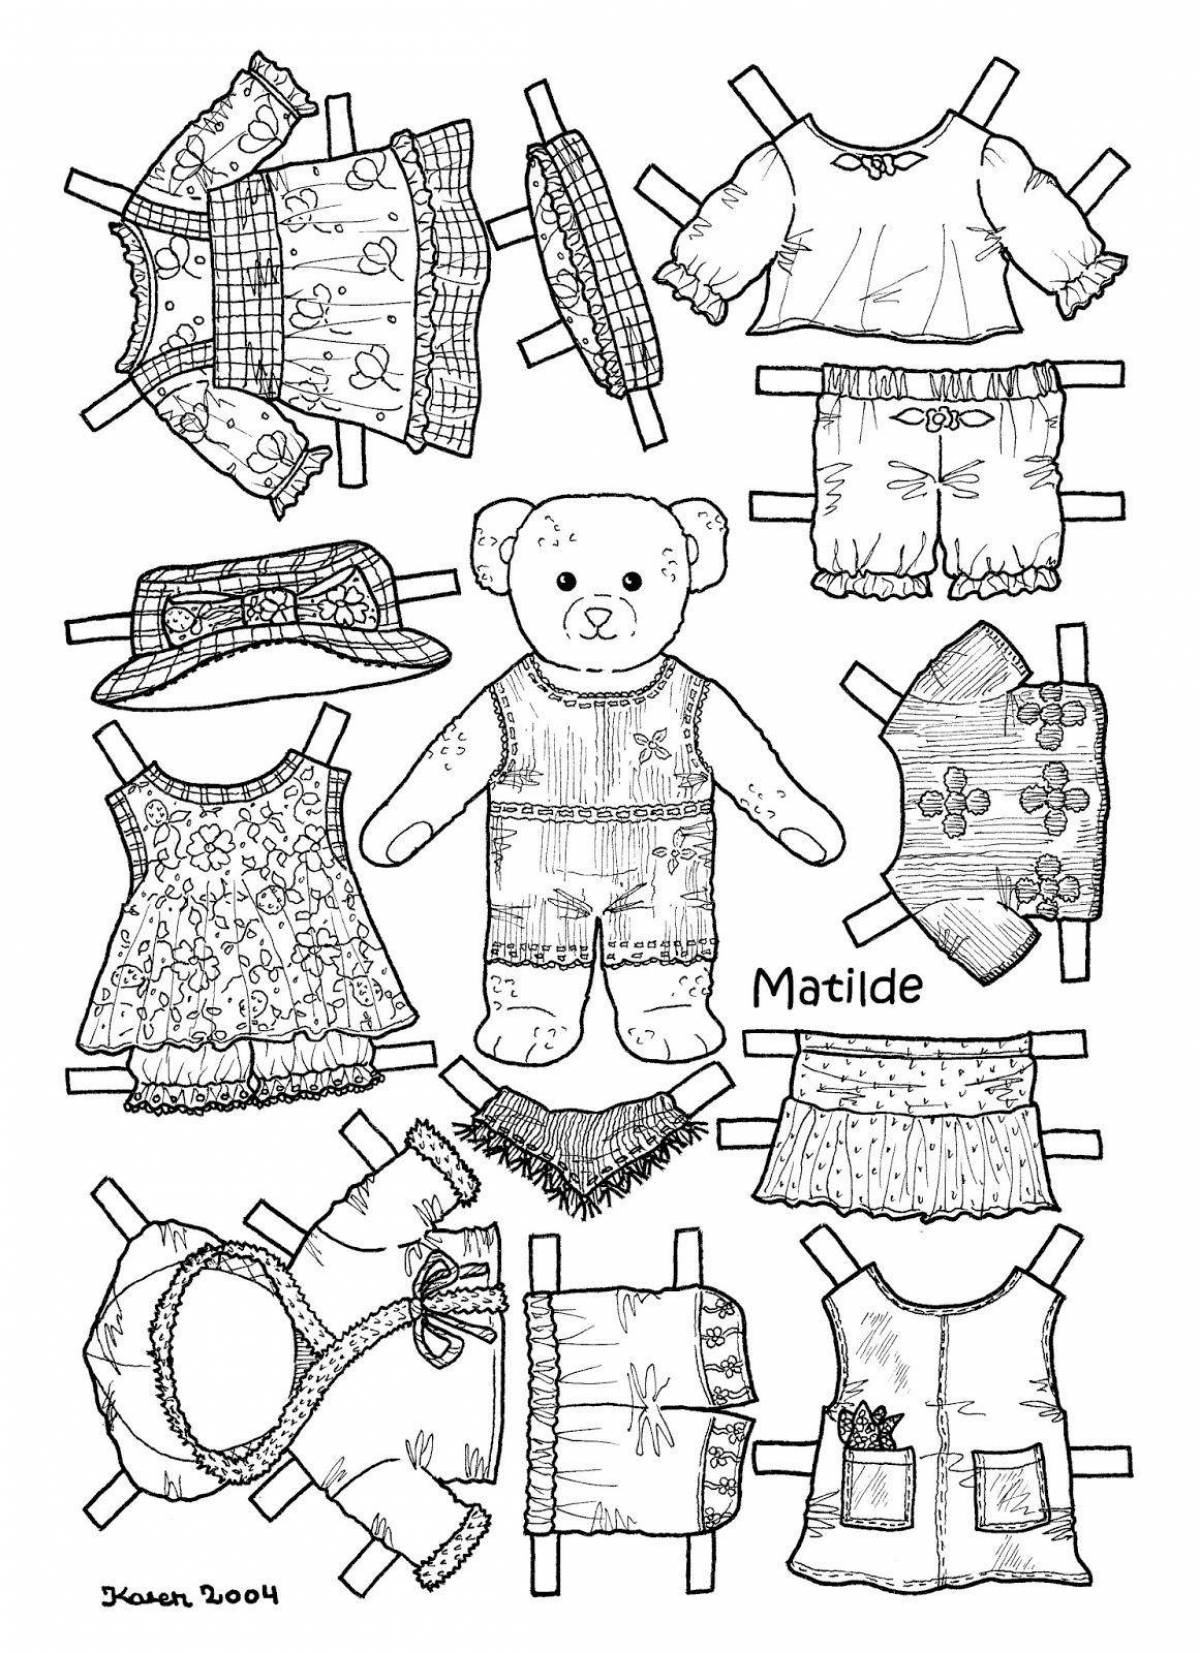 Cute cat coloring pages with clothes to cut out